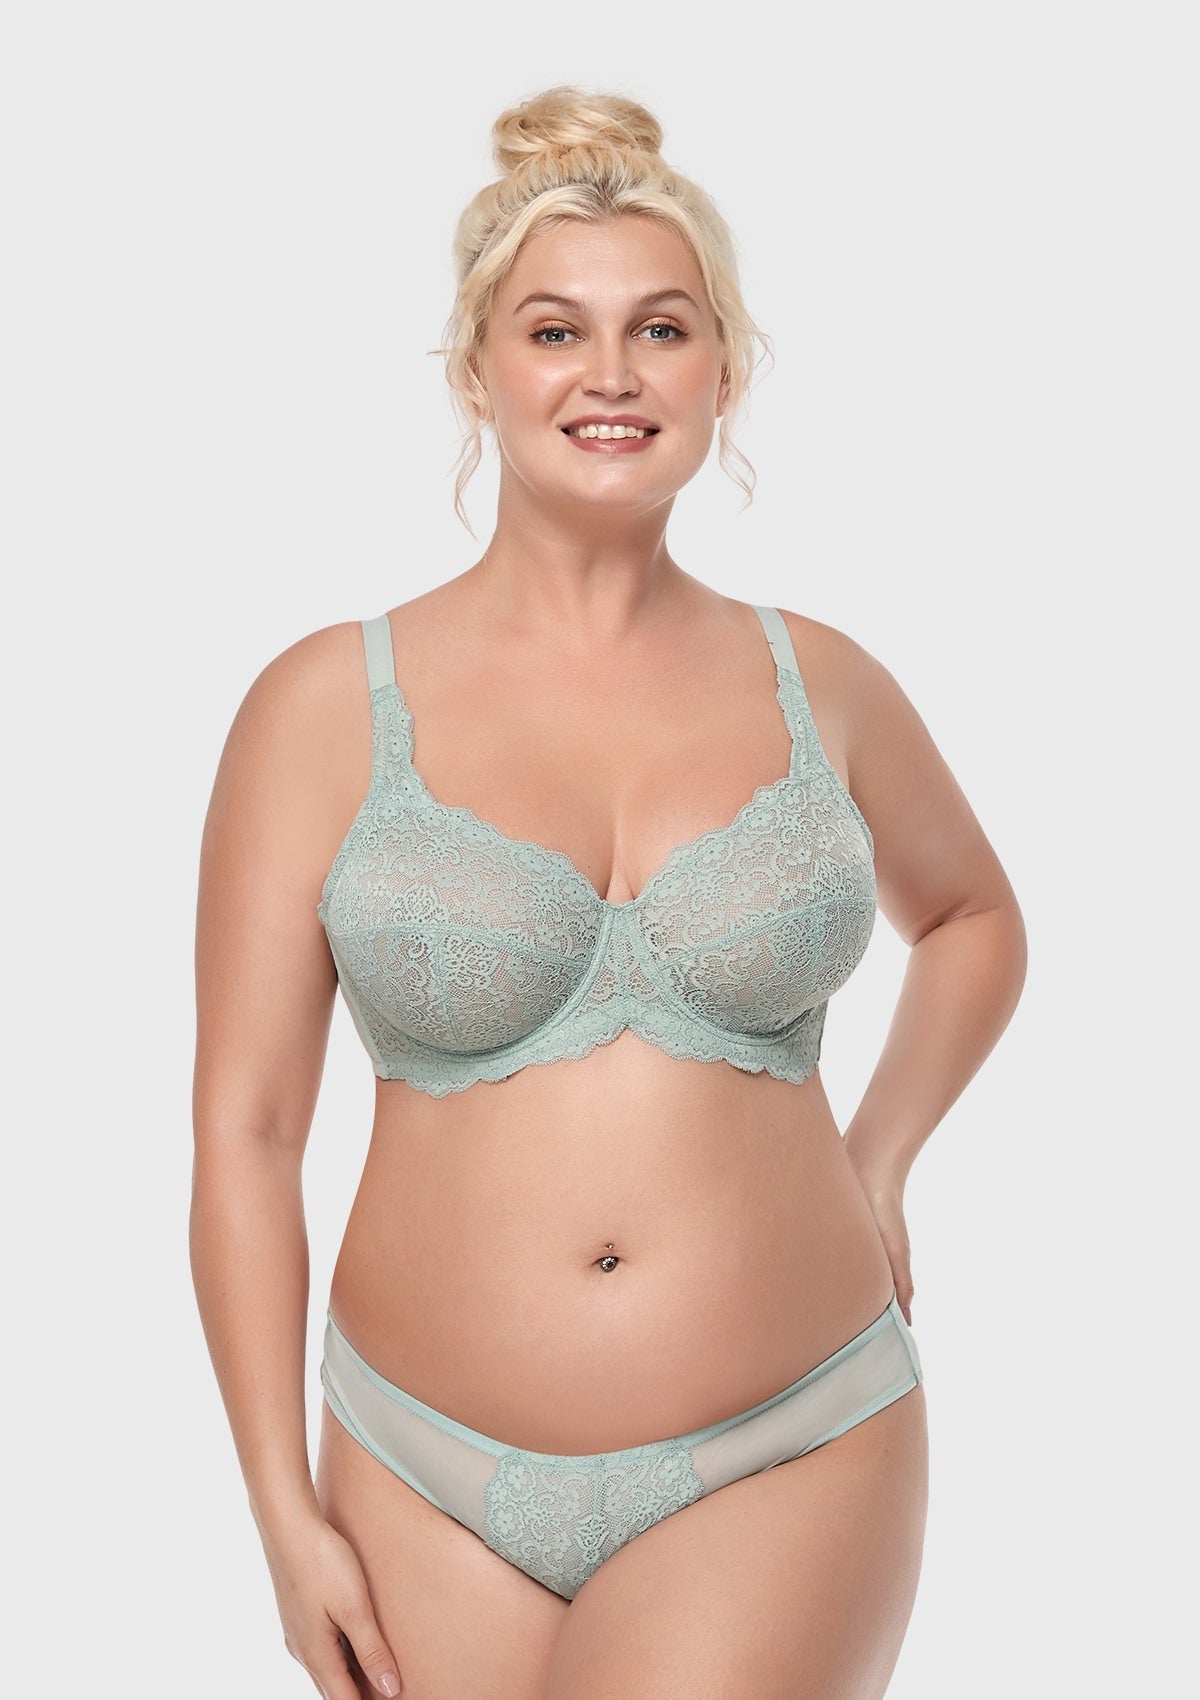 HSIA All-Over Floral Lace: Best Bra For Elderly With Sagging Breasts - Crystal Blue / 44 / DDD/F